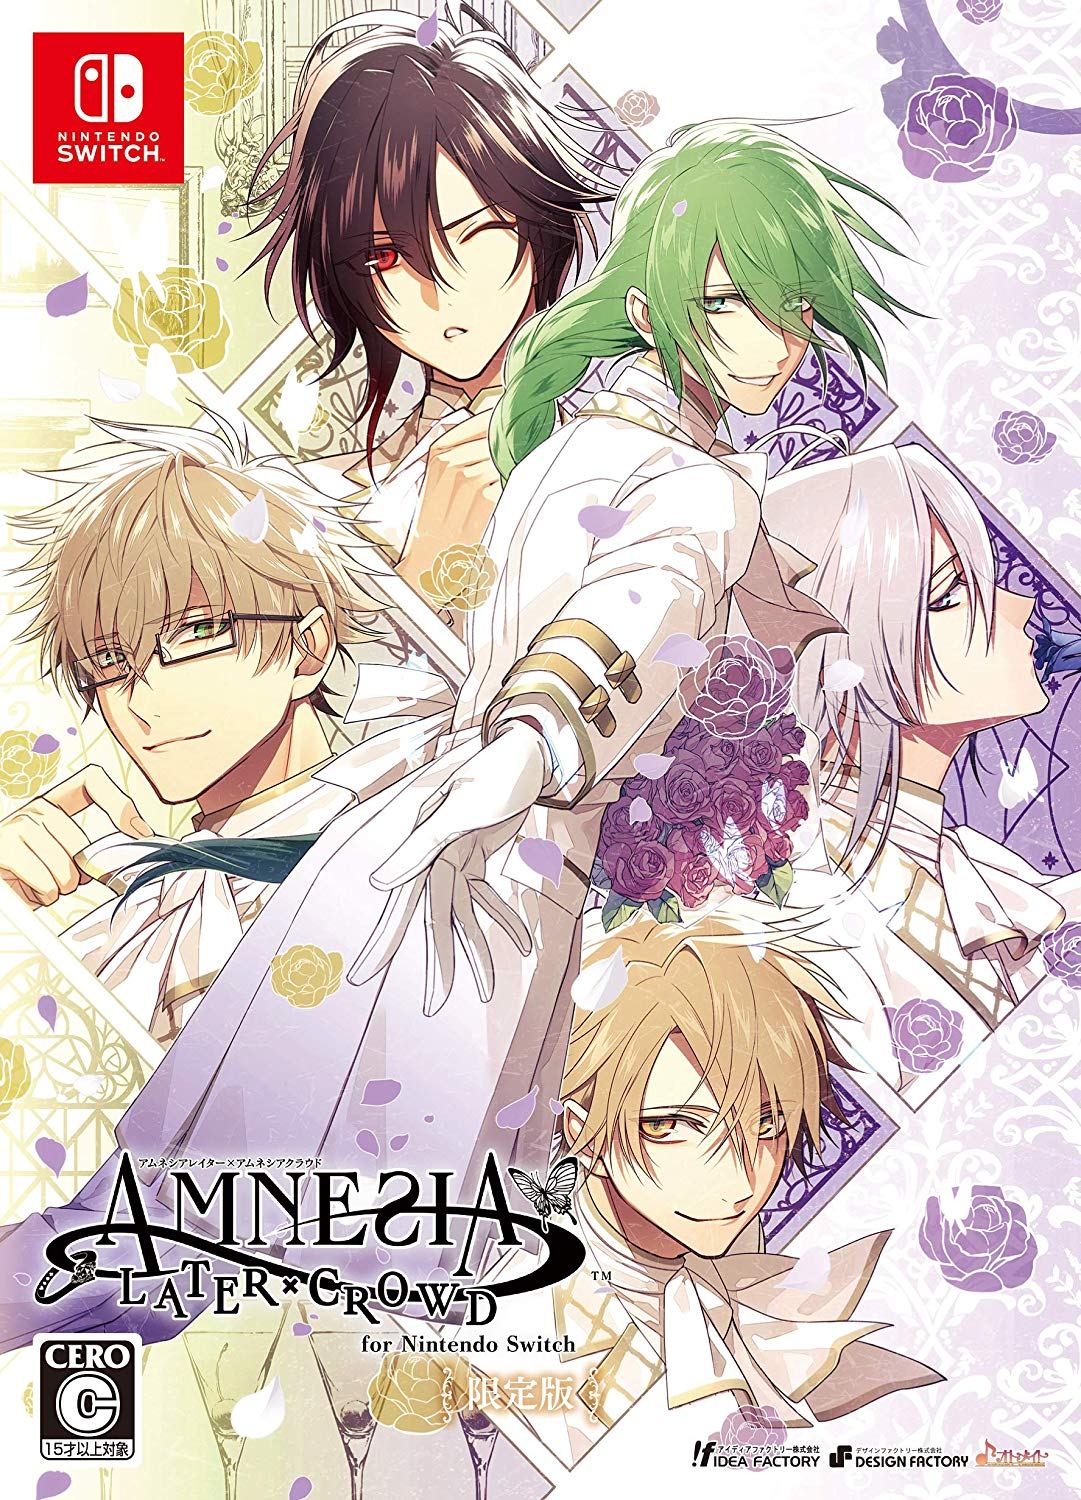 Amnesia Later x Crowd for Nintendo Switch [Limited Edition] for